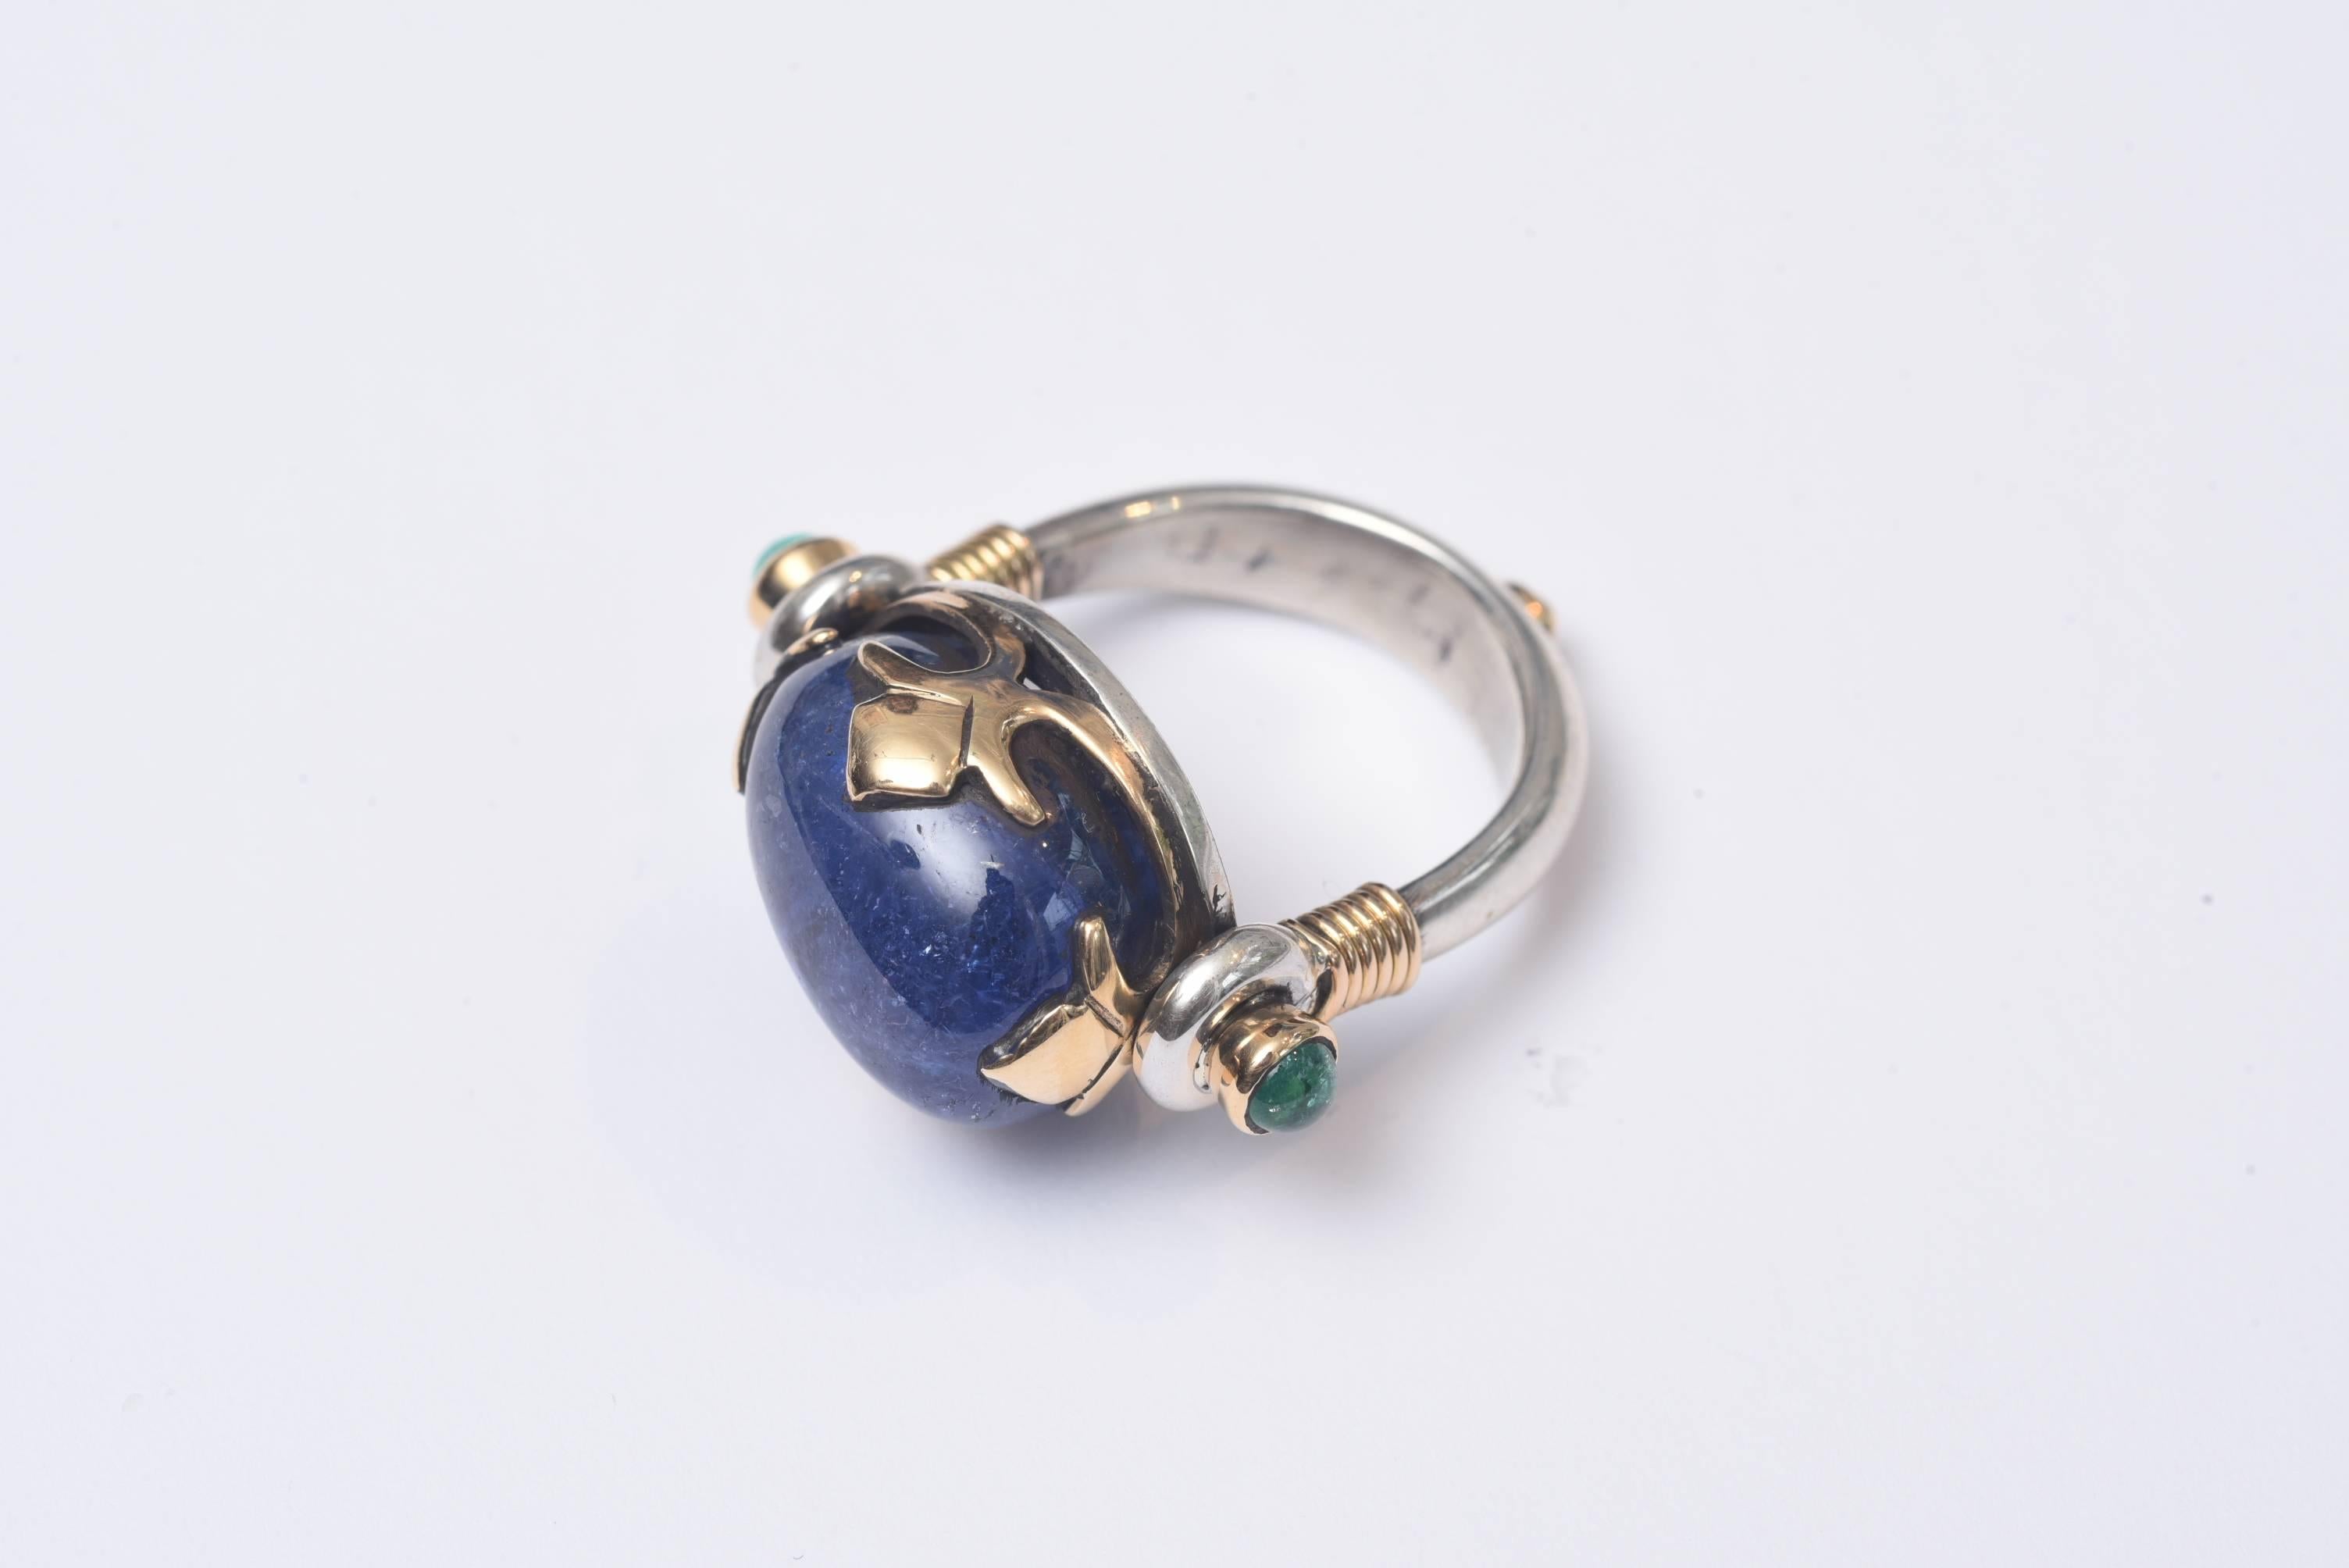 Lovely and unusual large cabochon sapphire set in 18K gold (not plated) with two emeralds at the sides and band is sterling silver.  Interesting and unusual gold fleur de lis bezel setting.  The sapphire portion measures .75 inches x .50 inches. 